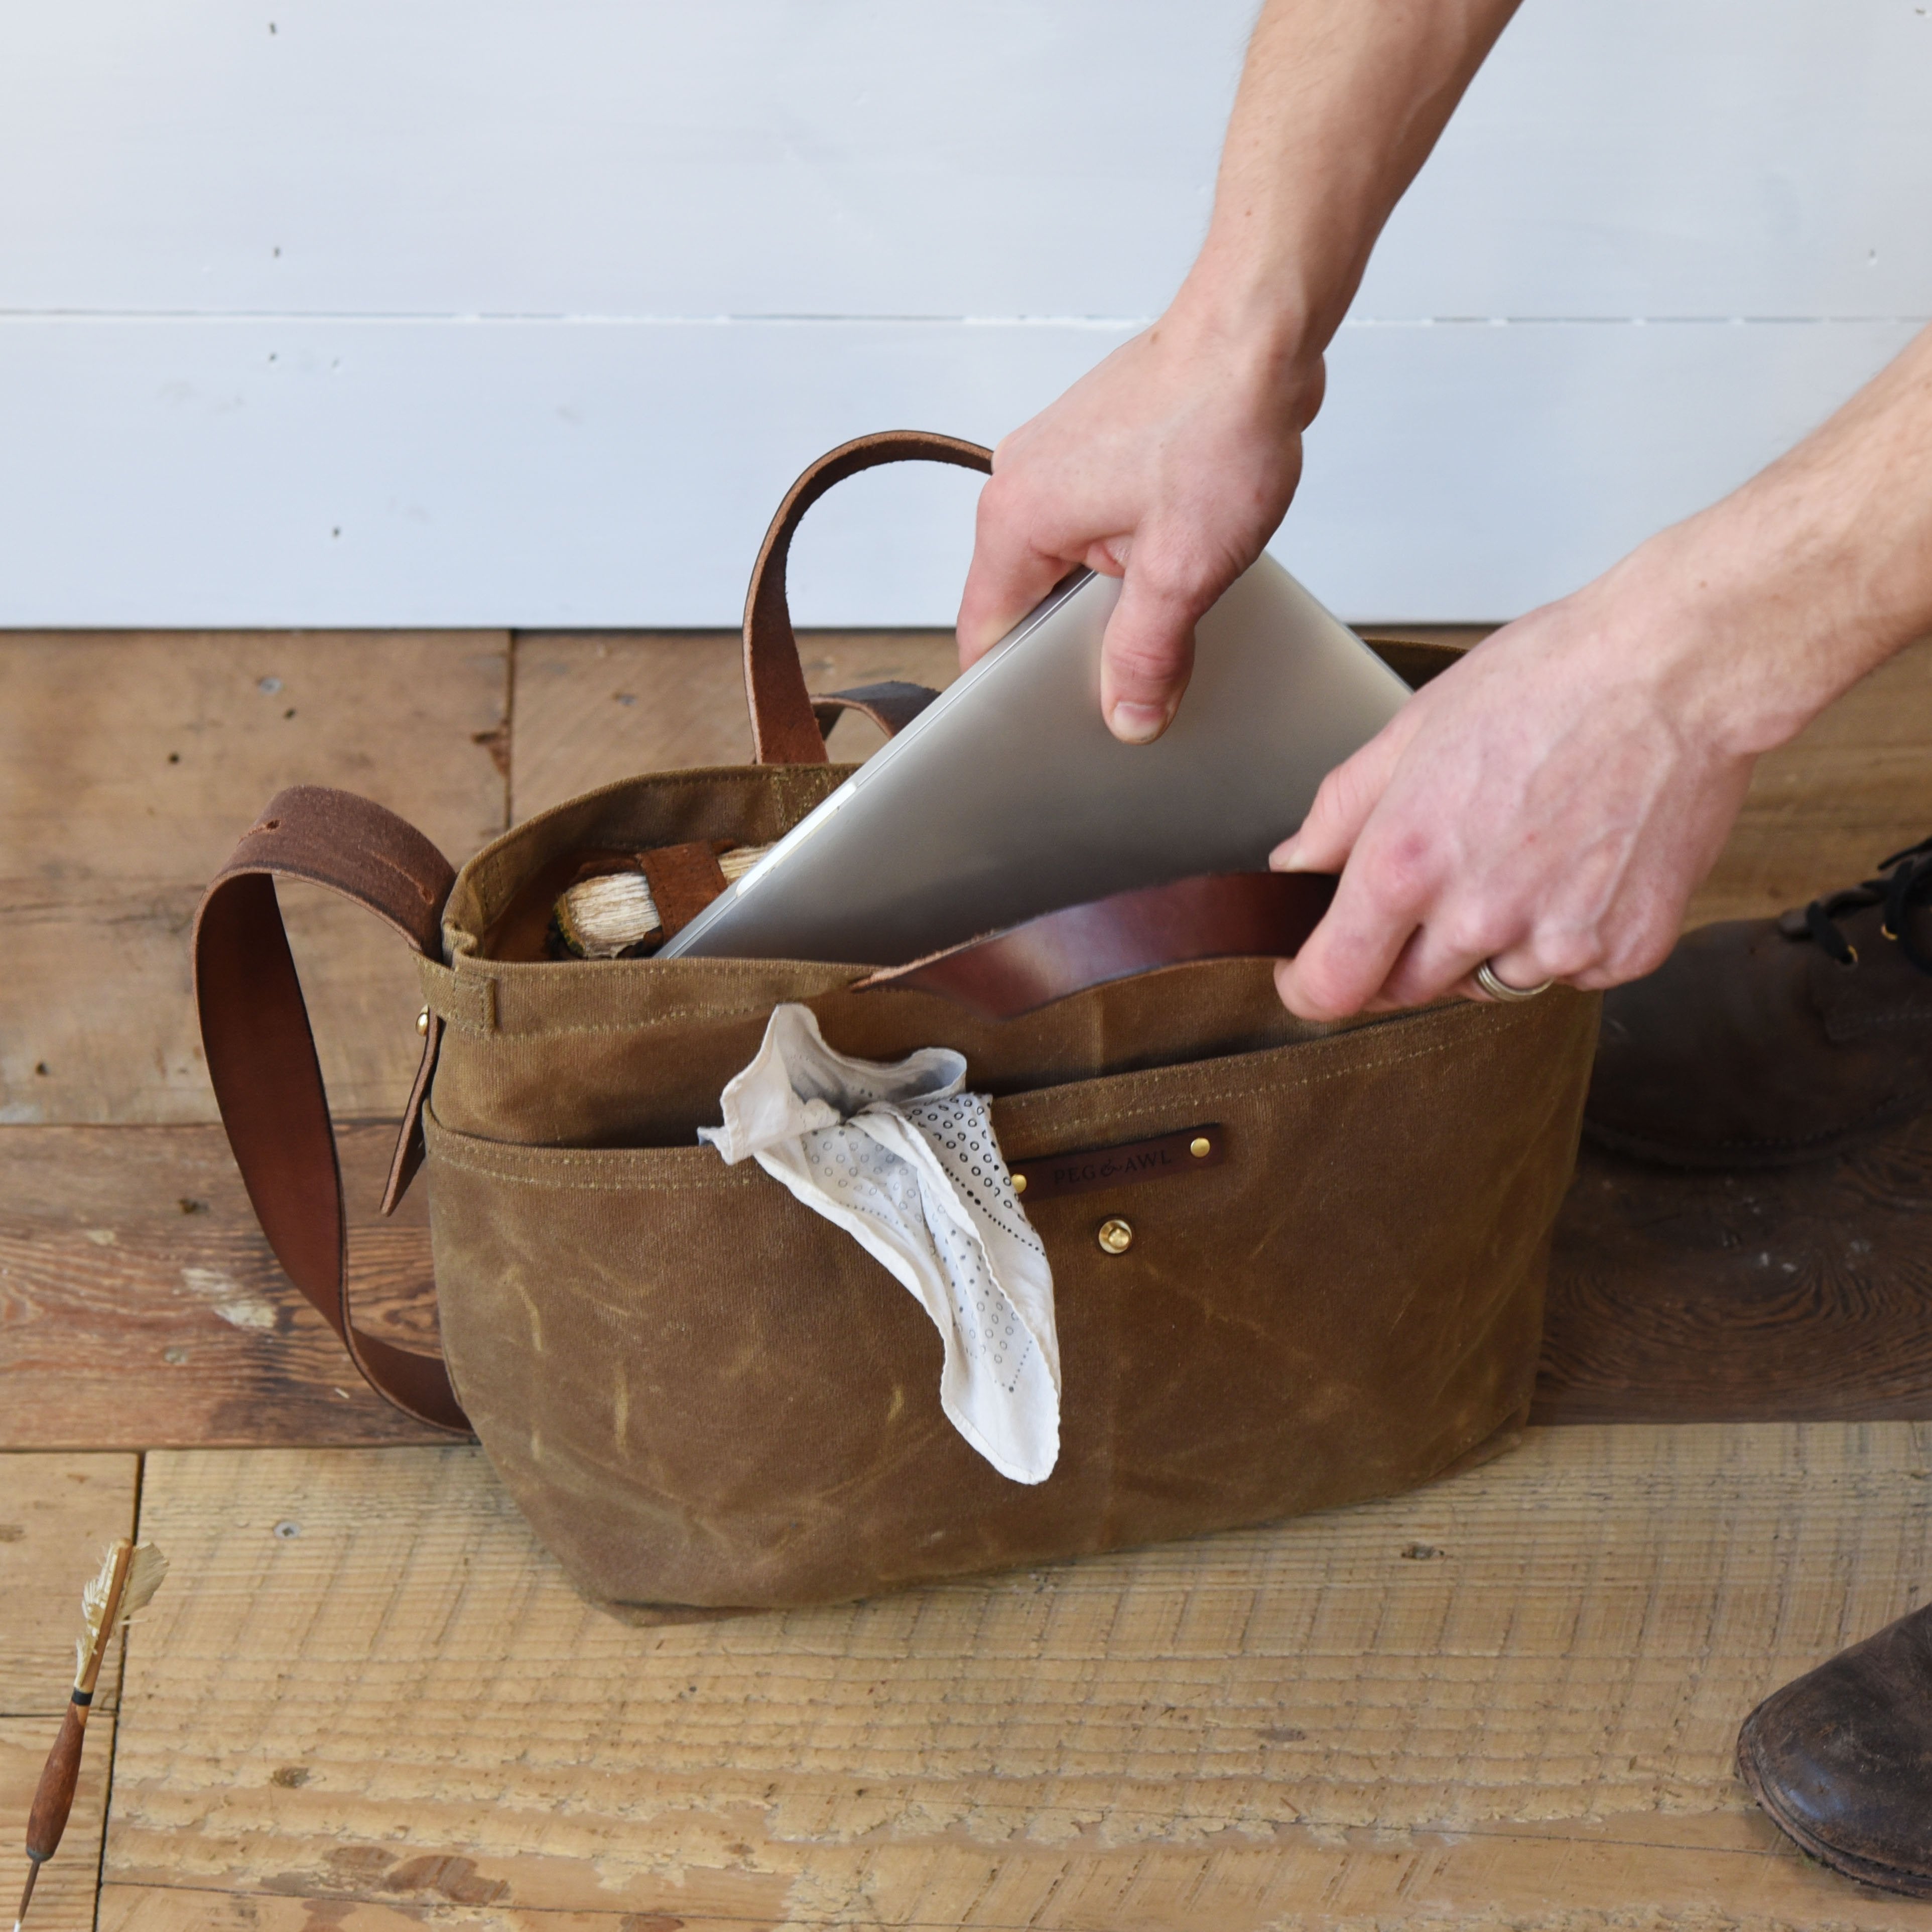 Large Waxed Canvas Tote Bag